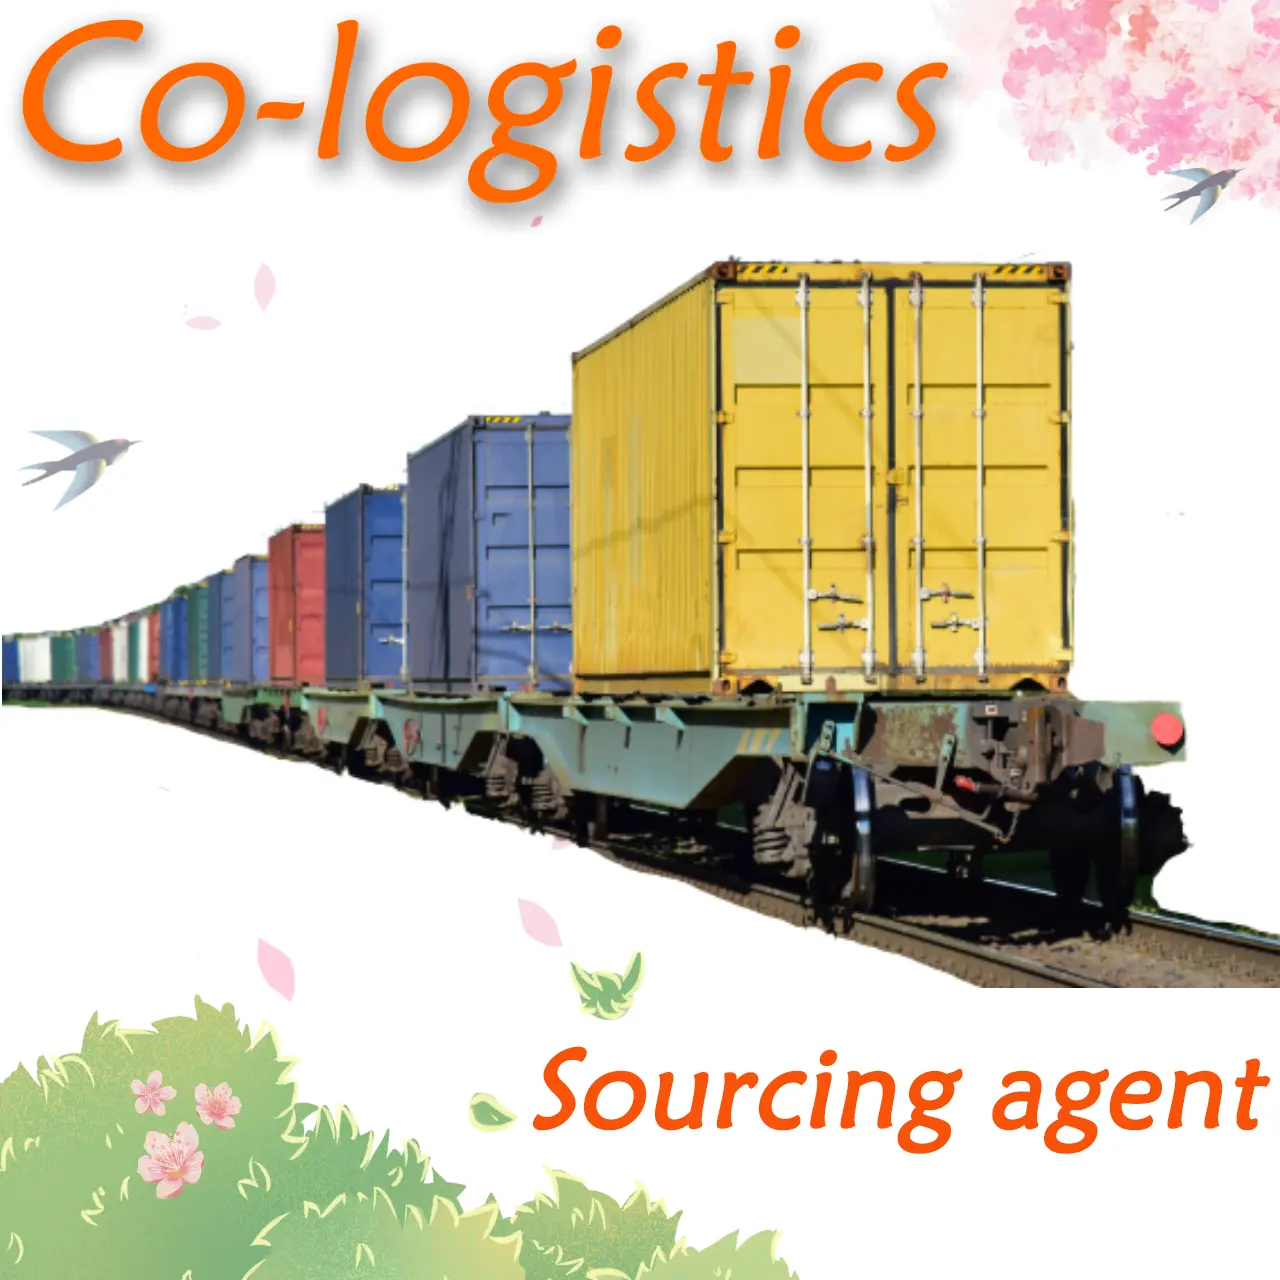 Railway shipping cost international logsitics Taobao freight forwardin door to door service from Shenzhen China to France Europe